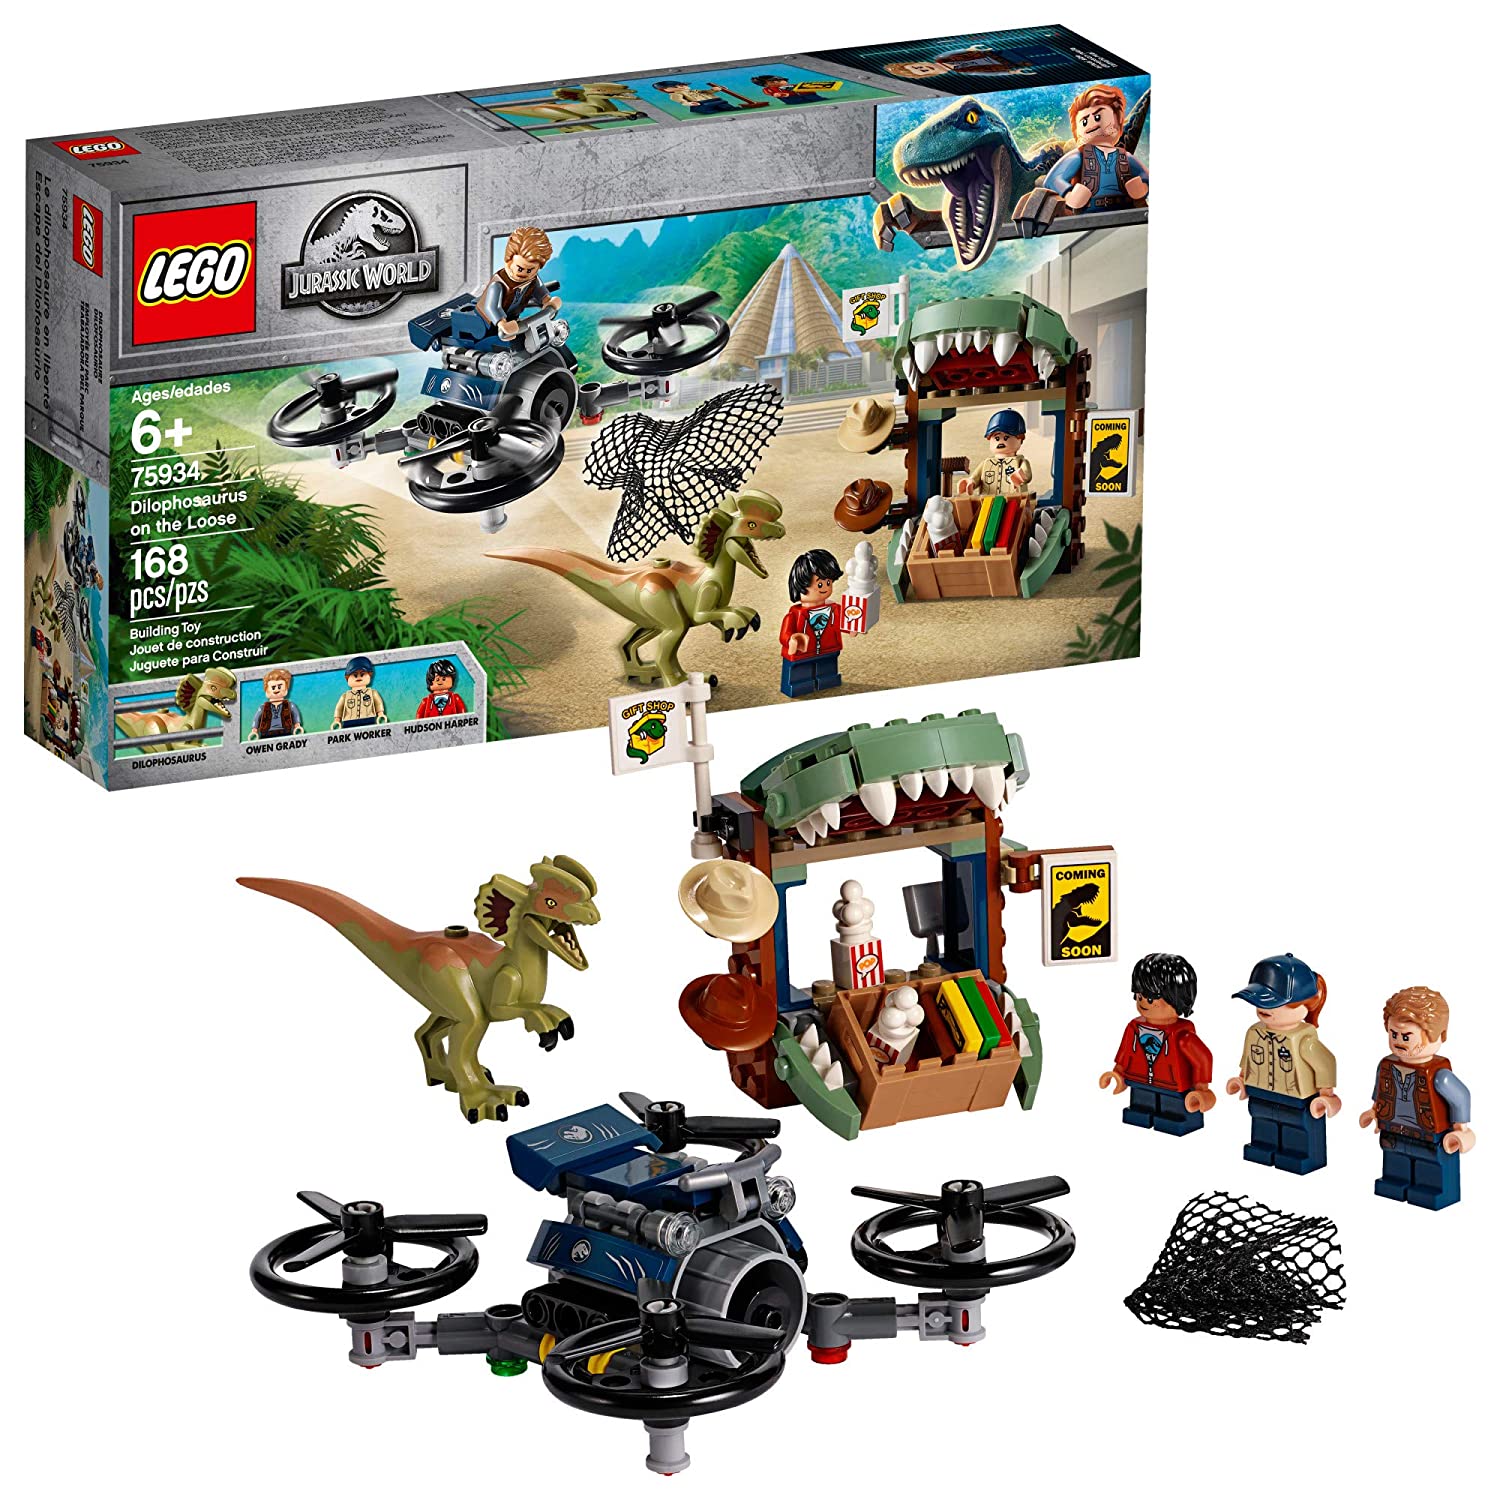 Top 9 Best Lego Jurassic Park Sets Reviews in 2022 2